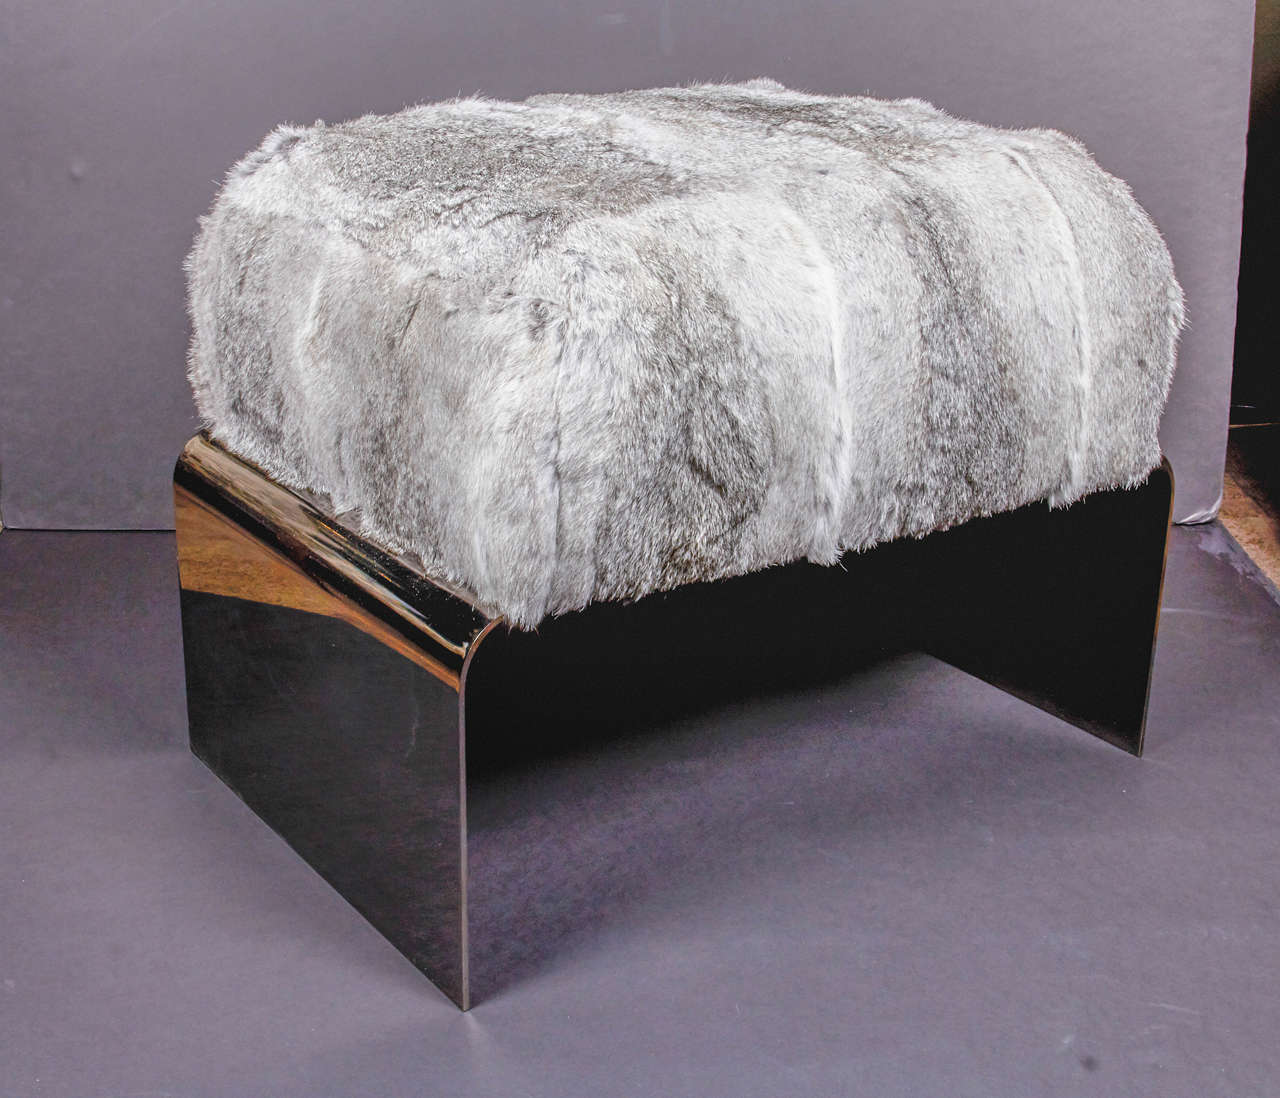 Hand-Crafted Rabbit Fur Luxury Ottoman Bench with Steel Base in Black Nickel For Sale